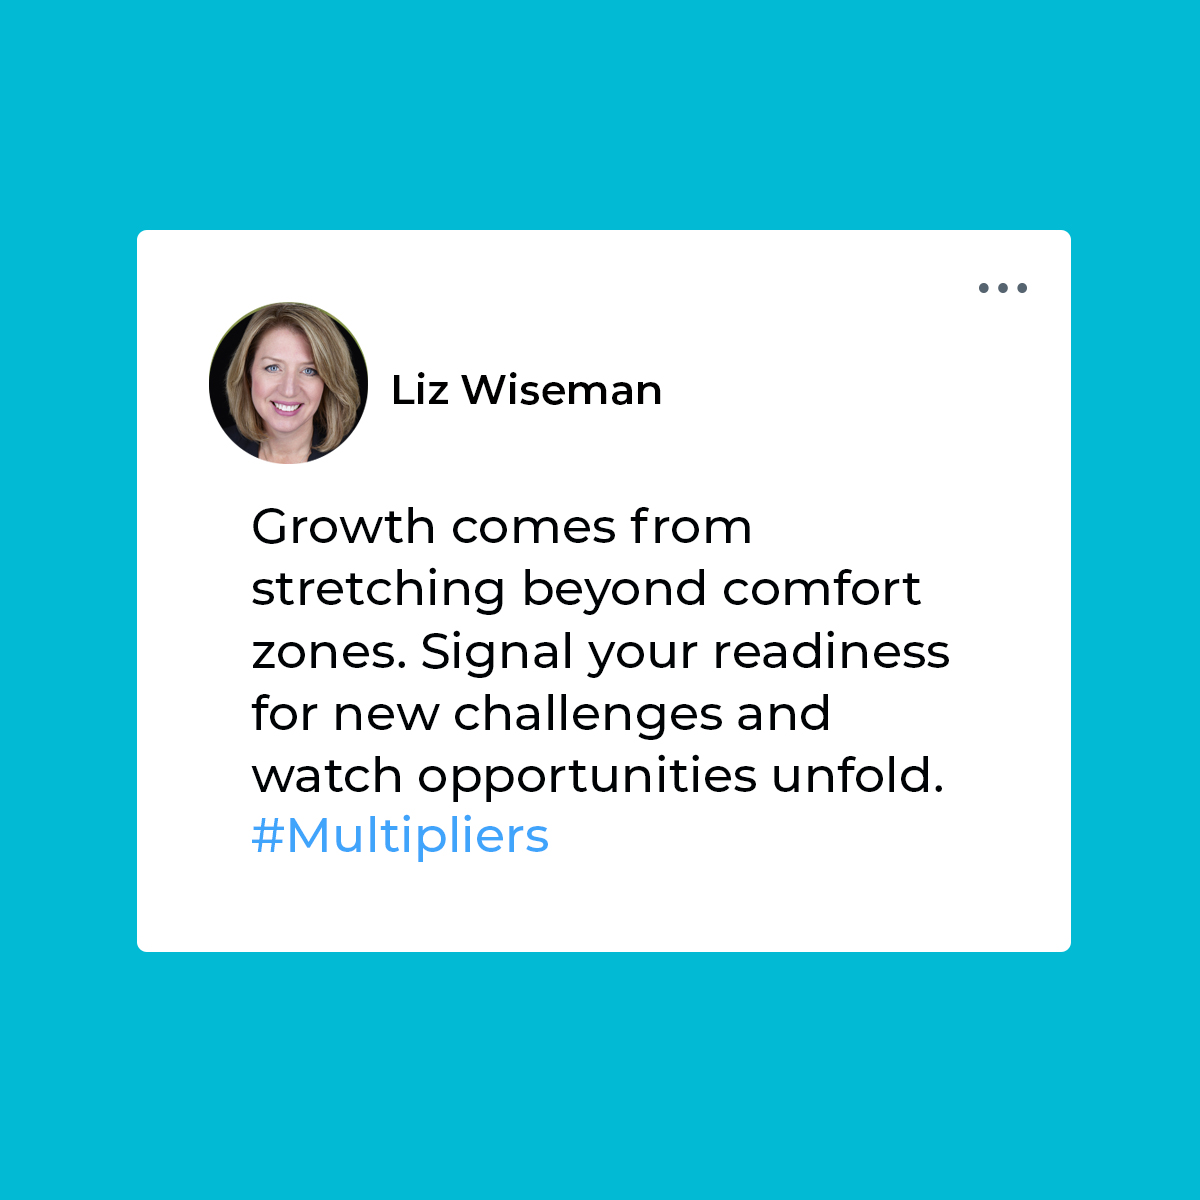 Seek challenges that stretch your capabilities if you're feeling stagnant. Take on new projects or propose initiatives to grow. Discuss stretch assignments with your manager to transform your career trajectory. #Multipliers